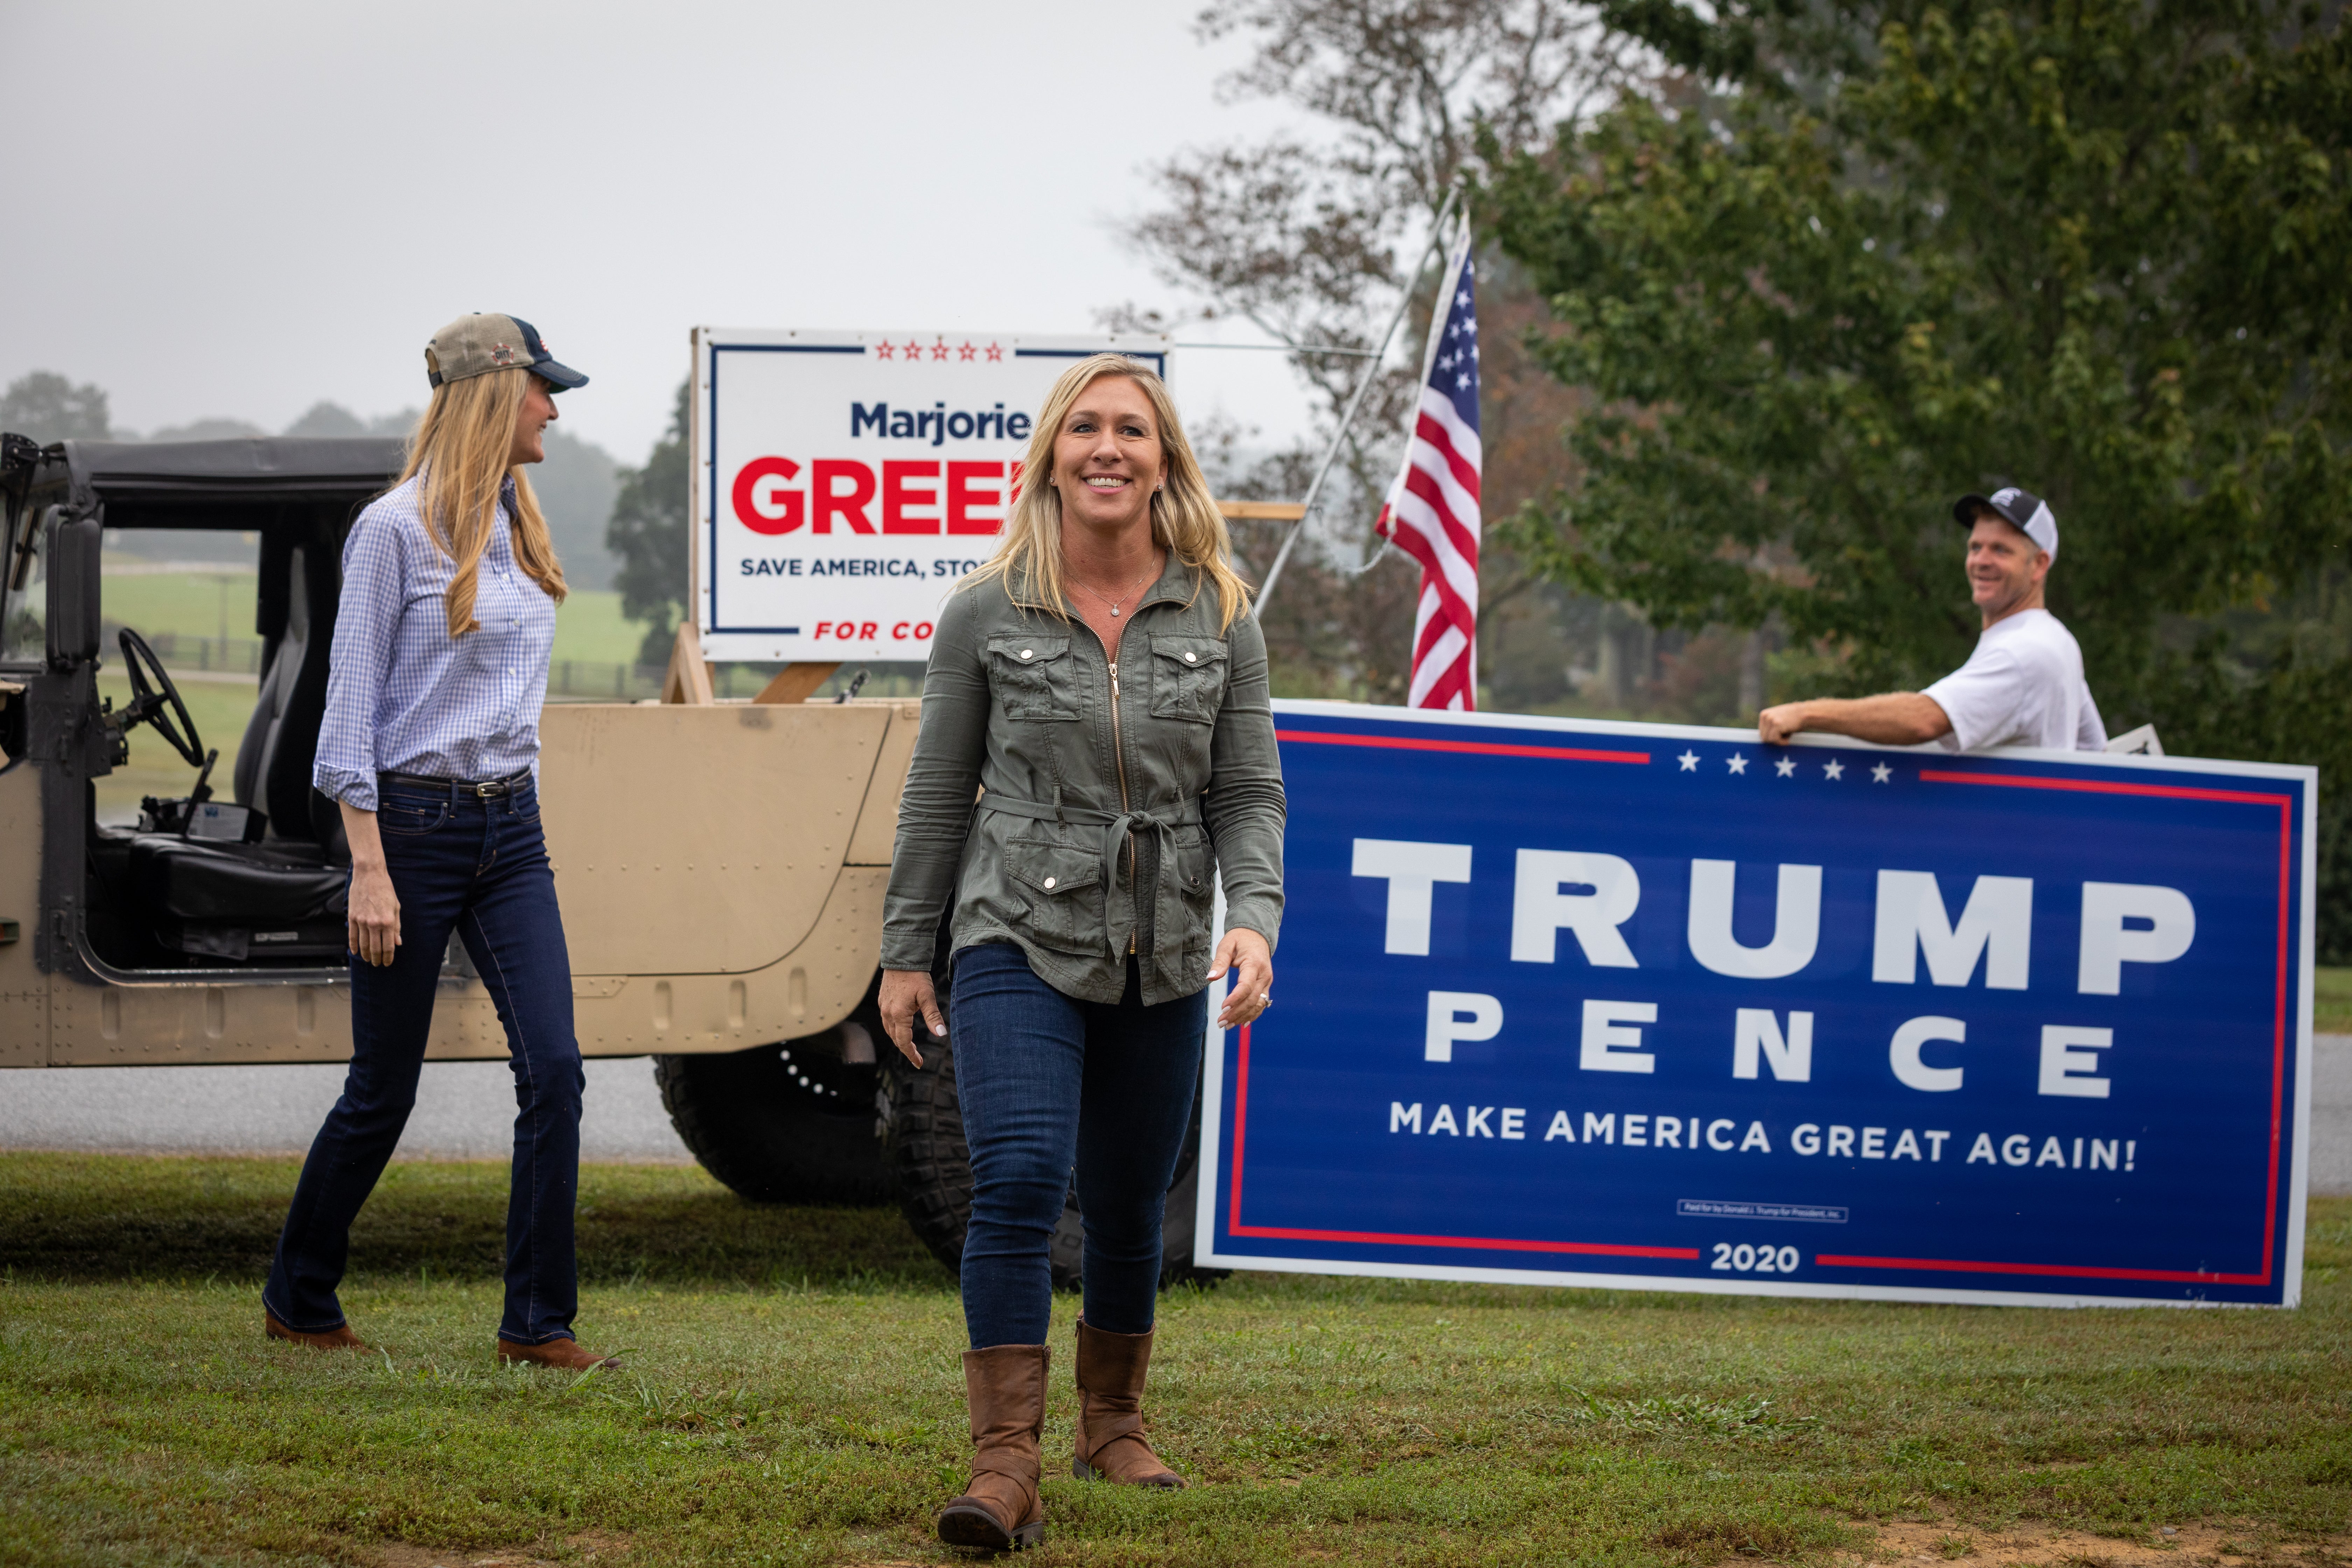 Republican Senator Kelly Loeffler and Republican House candidate Marjorie Taylor Greene, who has expressed support for QAnon, campaign in Georgia on 15 October.